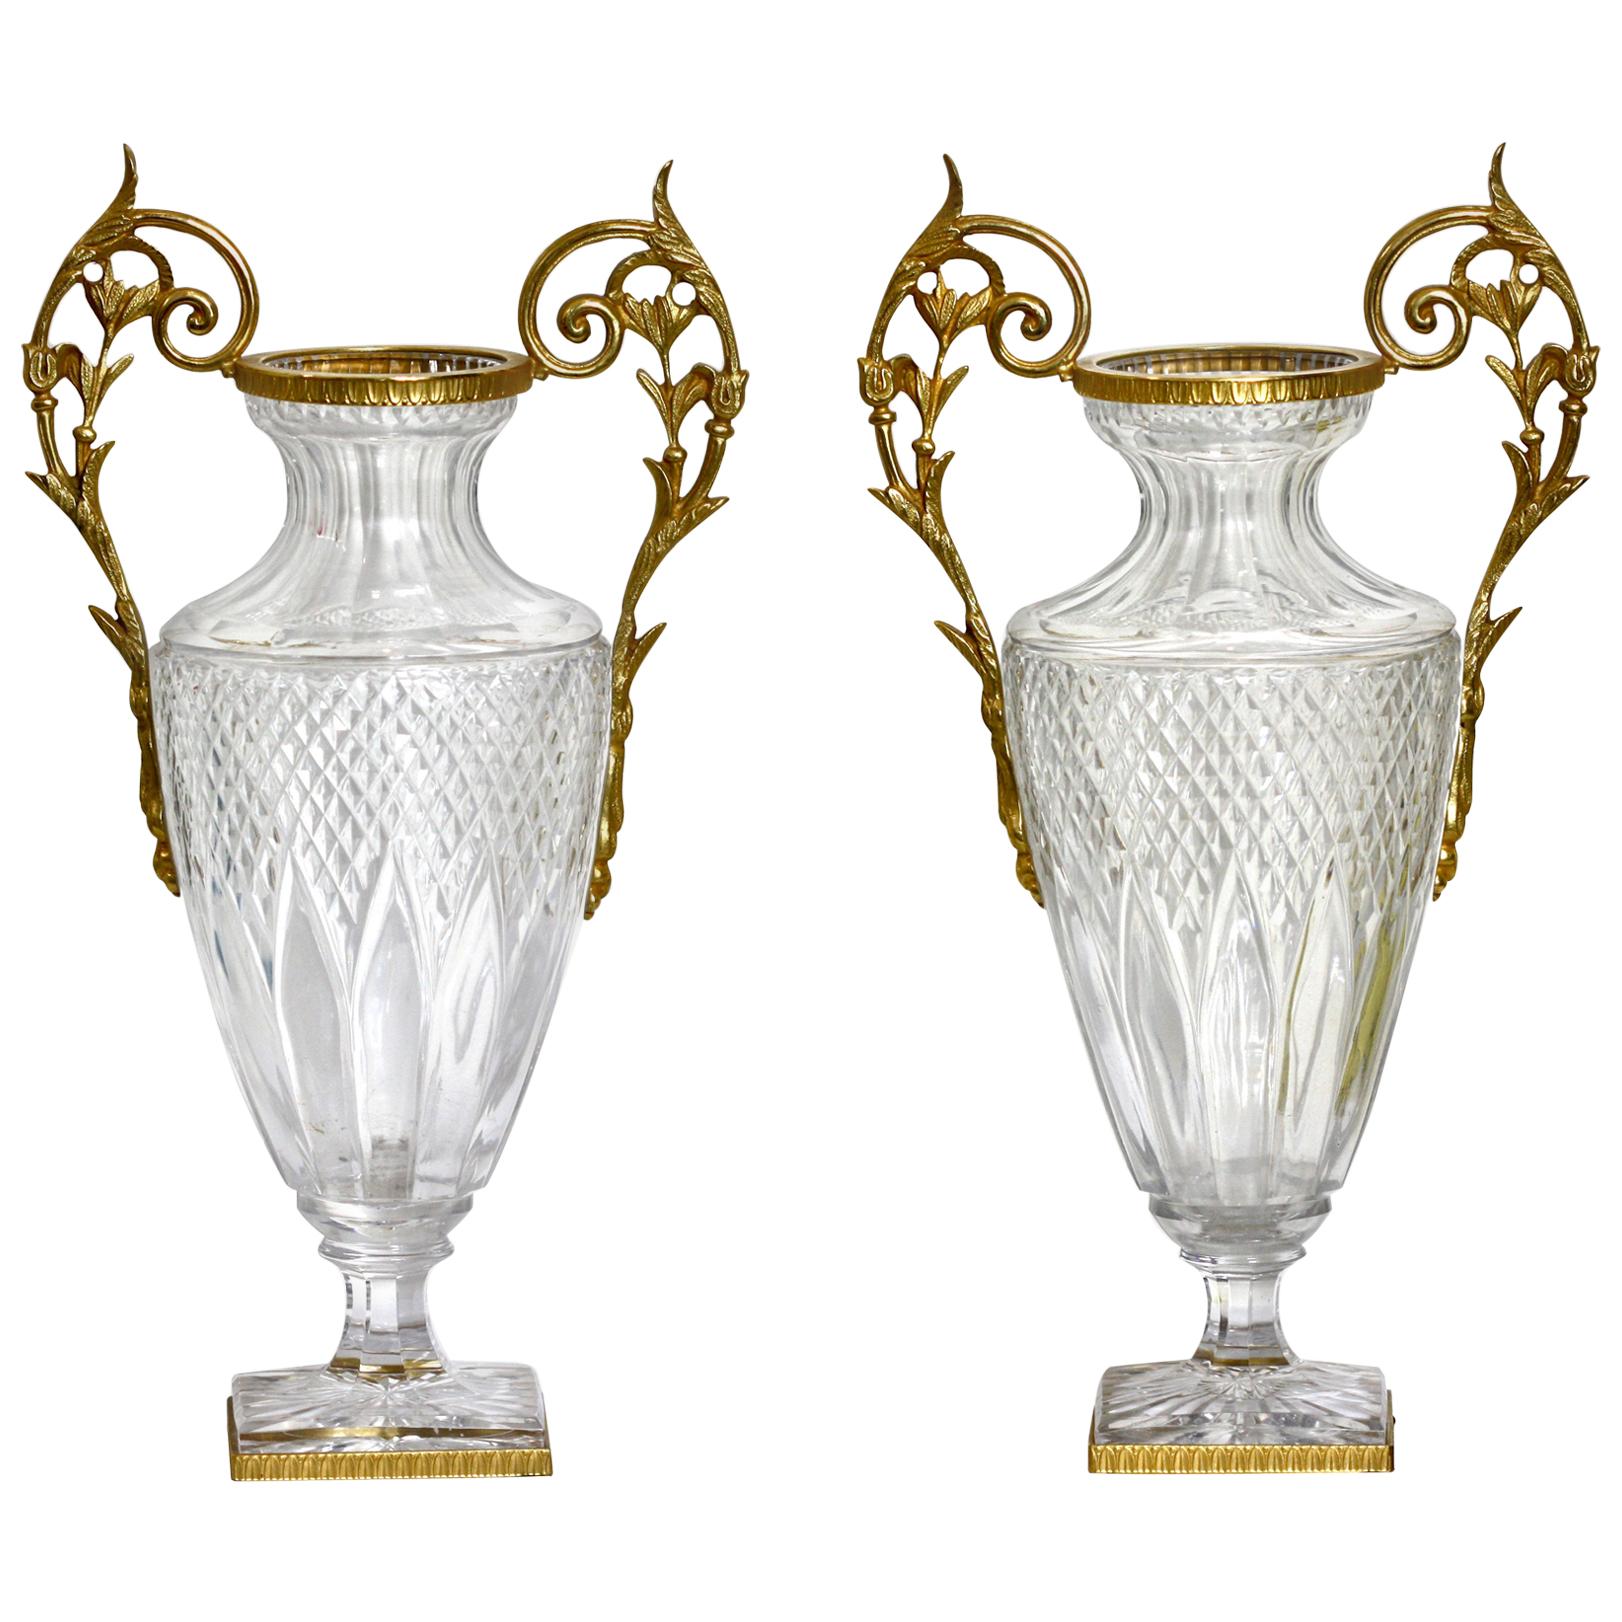 Pair of Empire Style Gilt-Bronze Mounted Cut Glass Urns